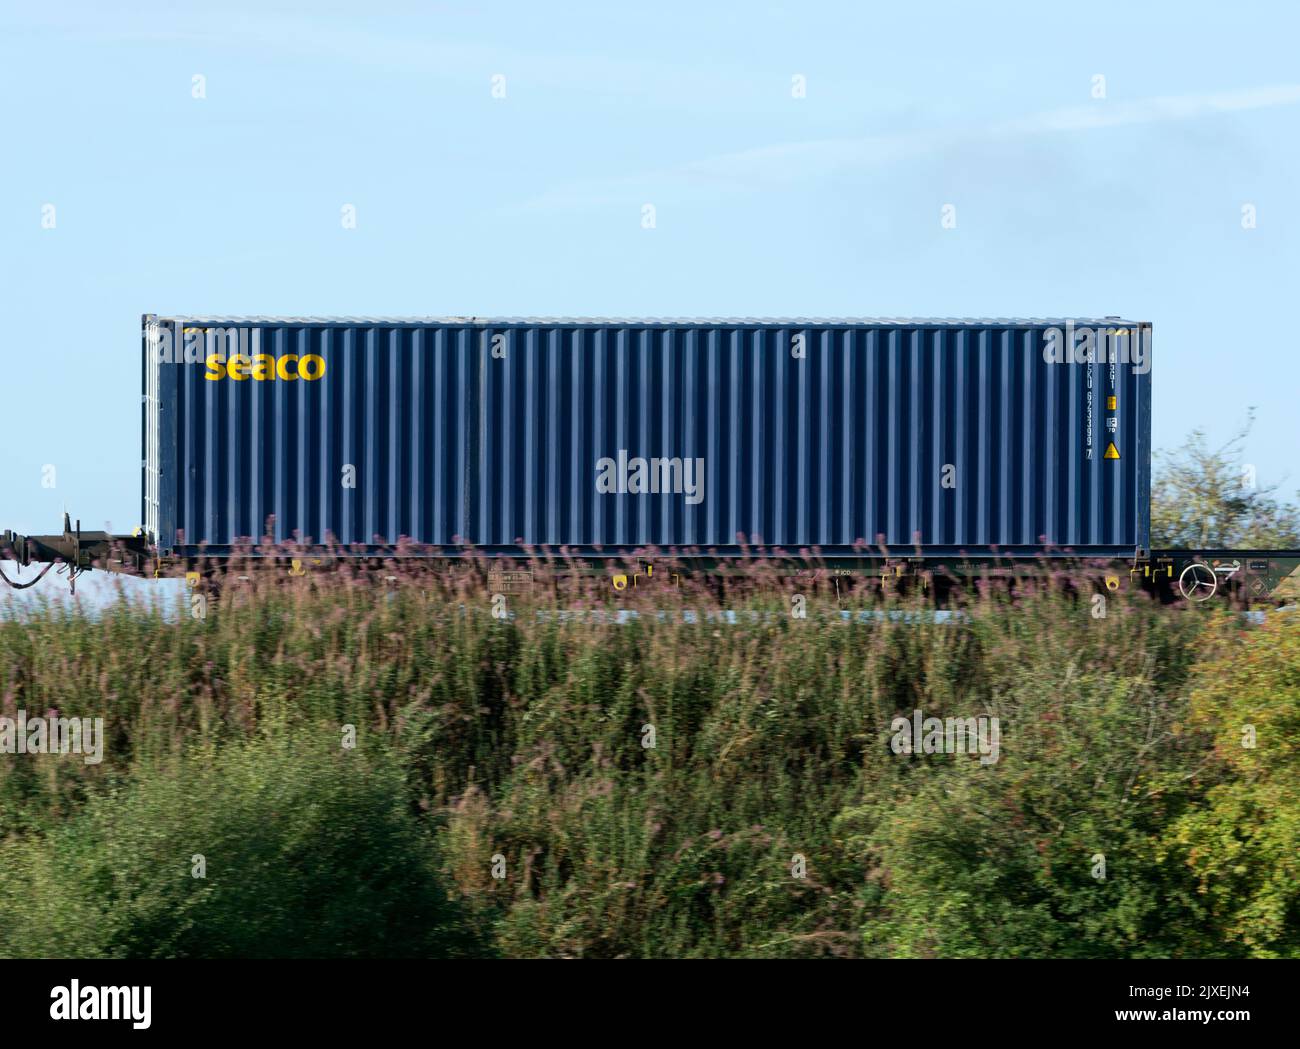 Seaco shipping container on a freightliner train, Warwickshire, UK Stock Photo